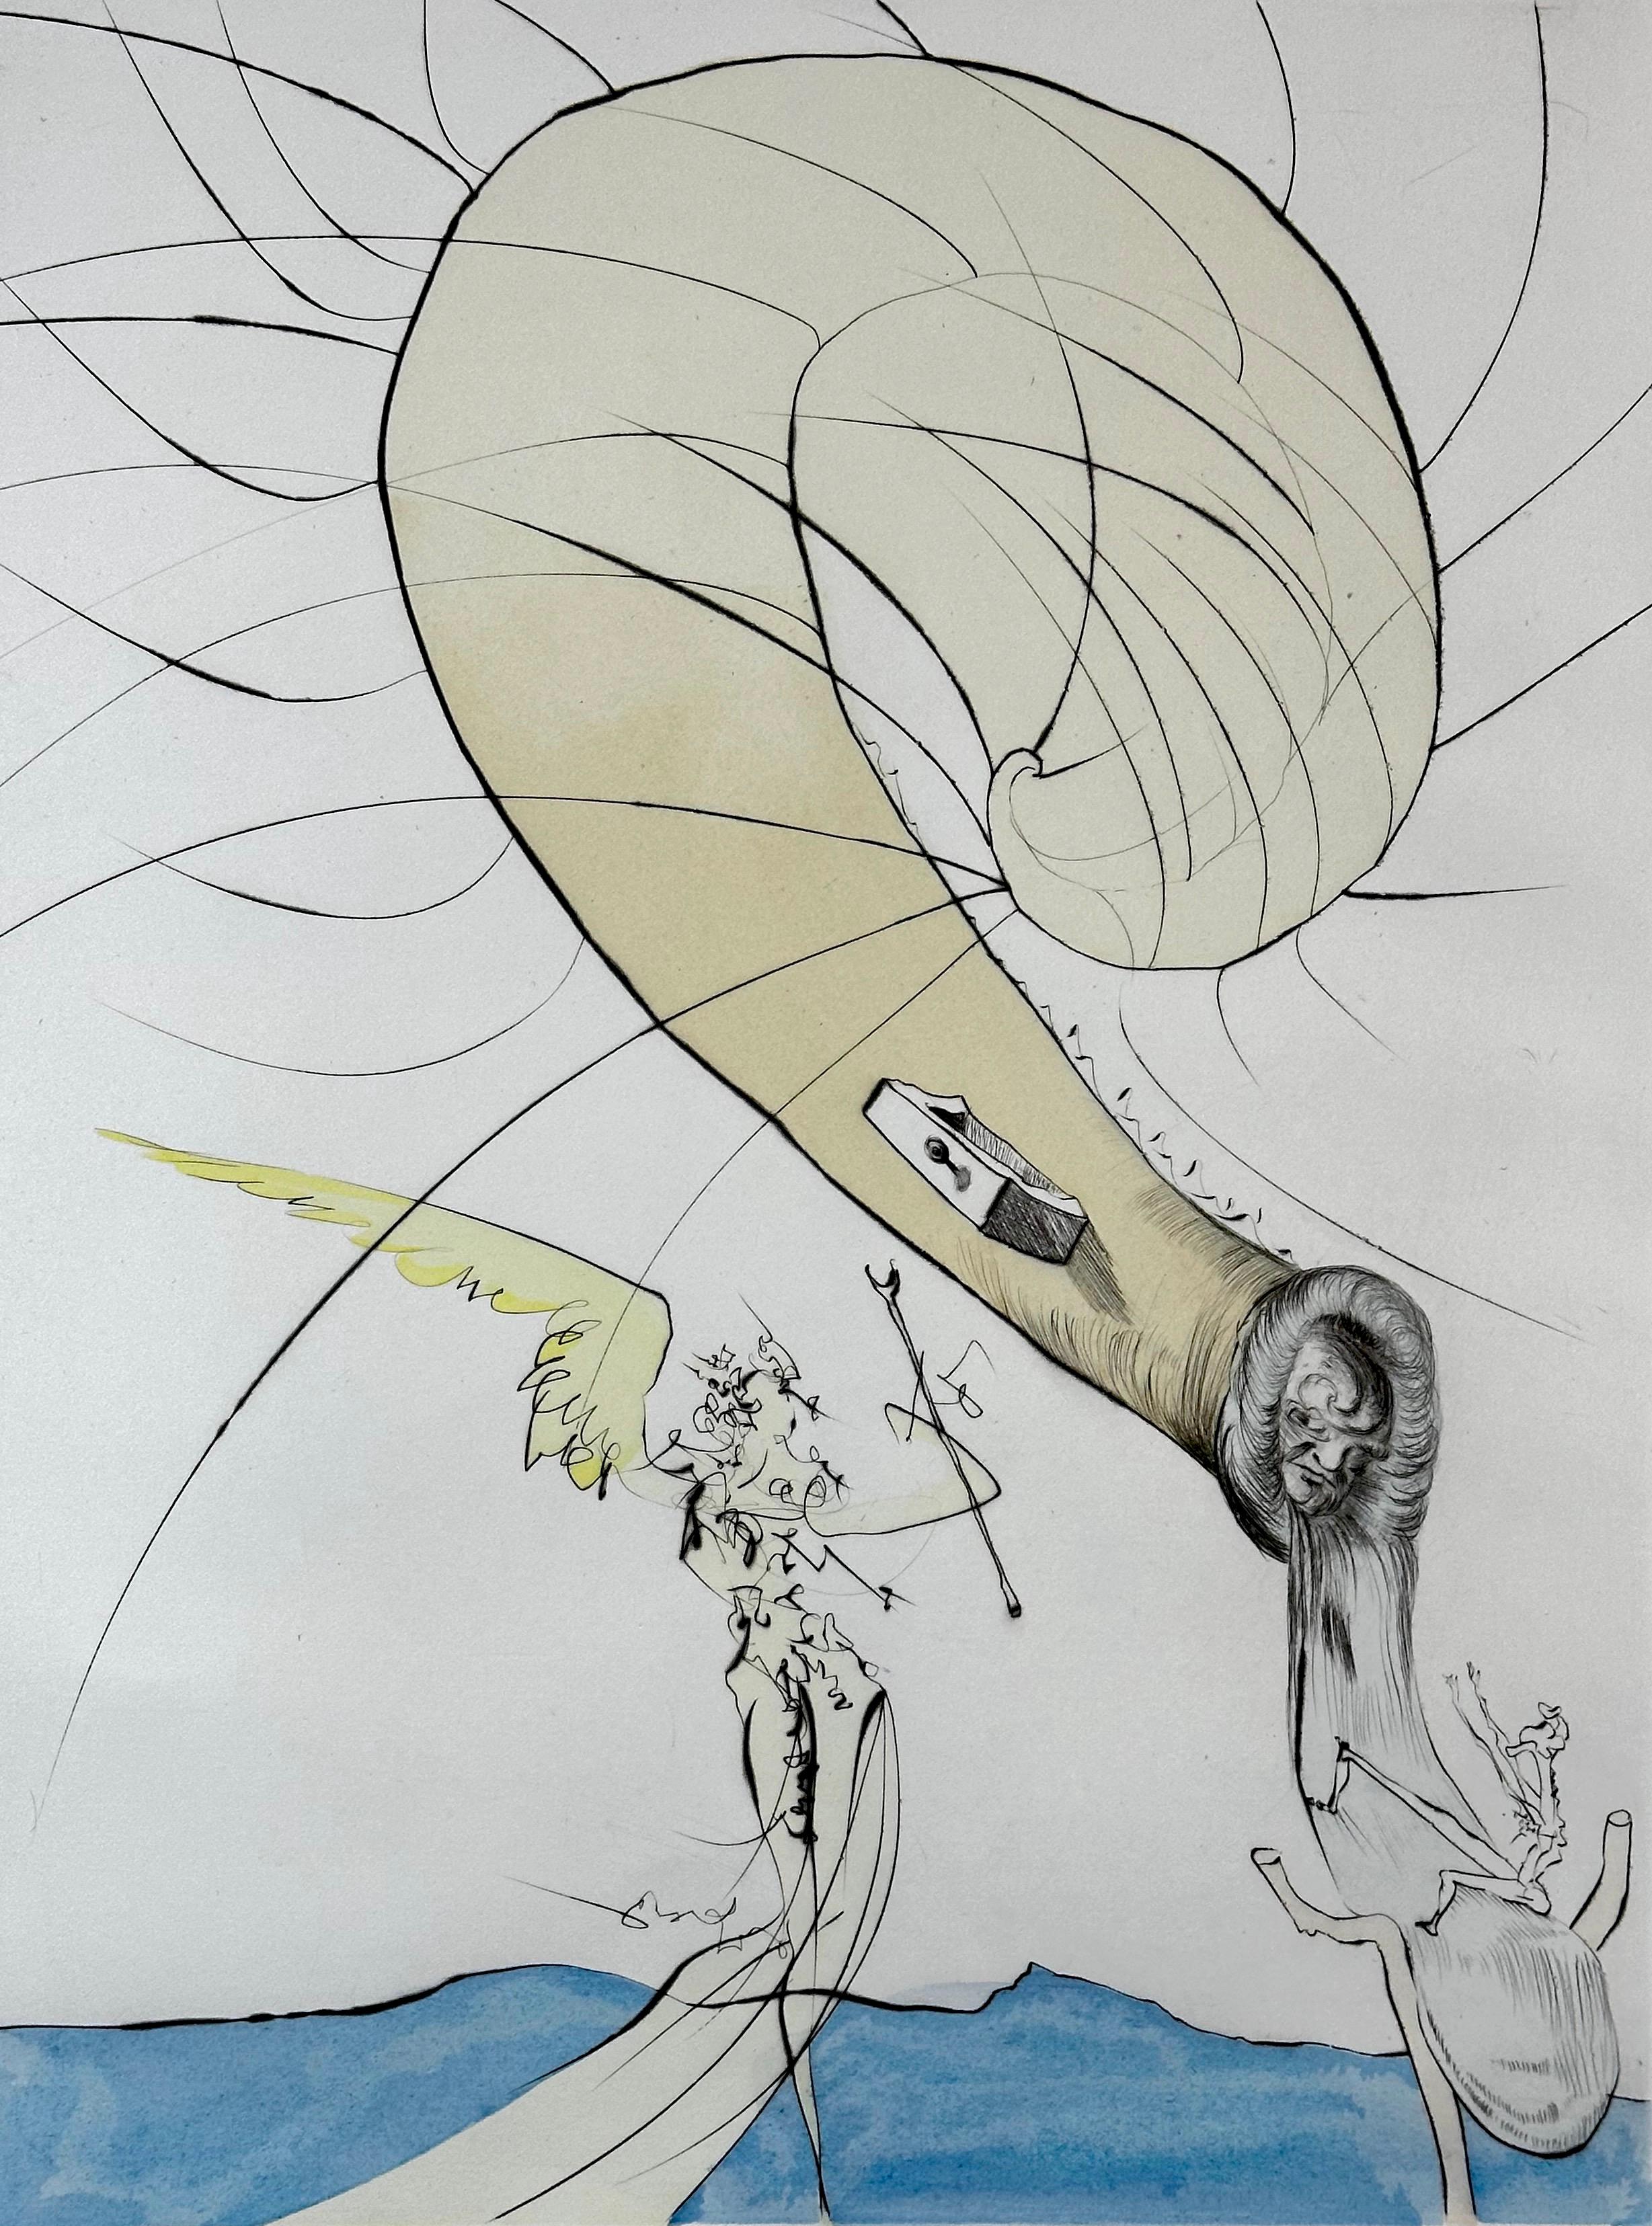 After 50 Years of Surrealism Freud with Snail Head - Print by Salvador Dalí